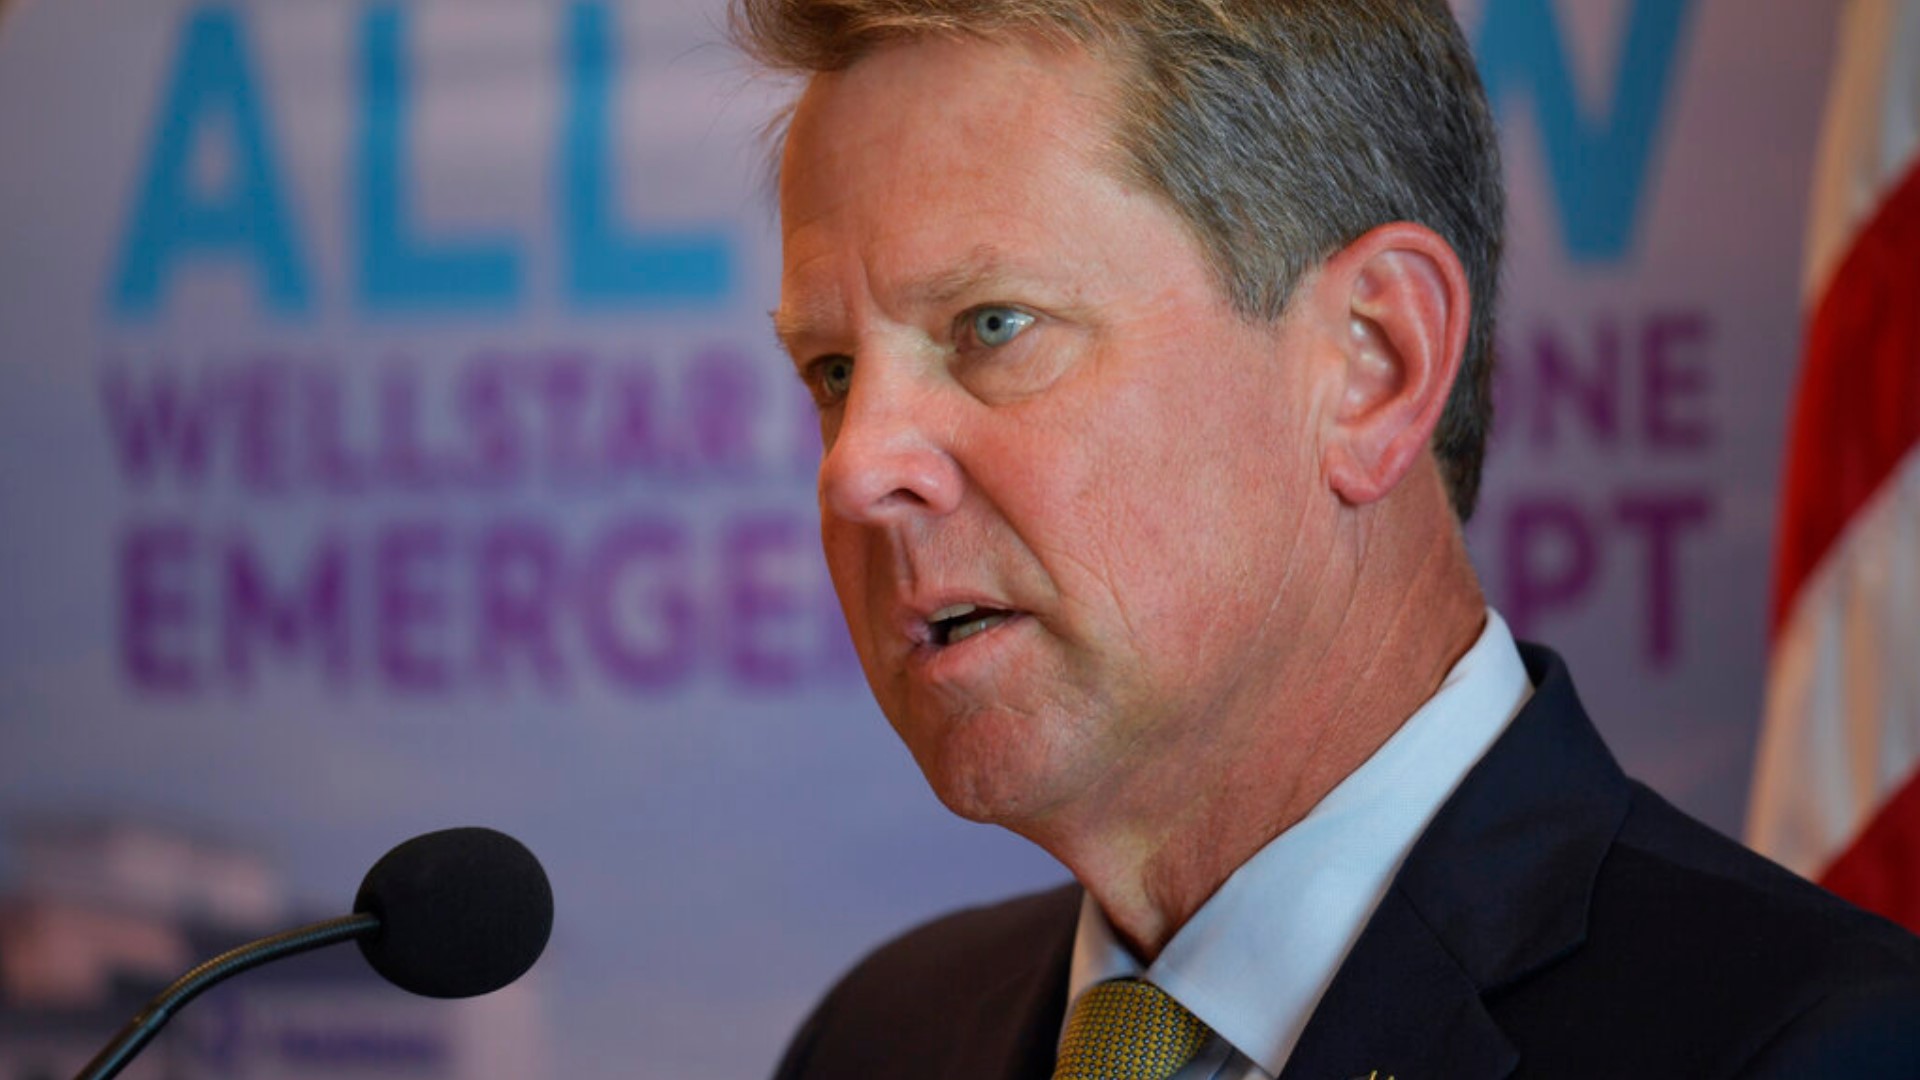 In an interview with 11Alive's Jeff Hullinger, Gov. Kemp spoke about the new legislation.